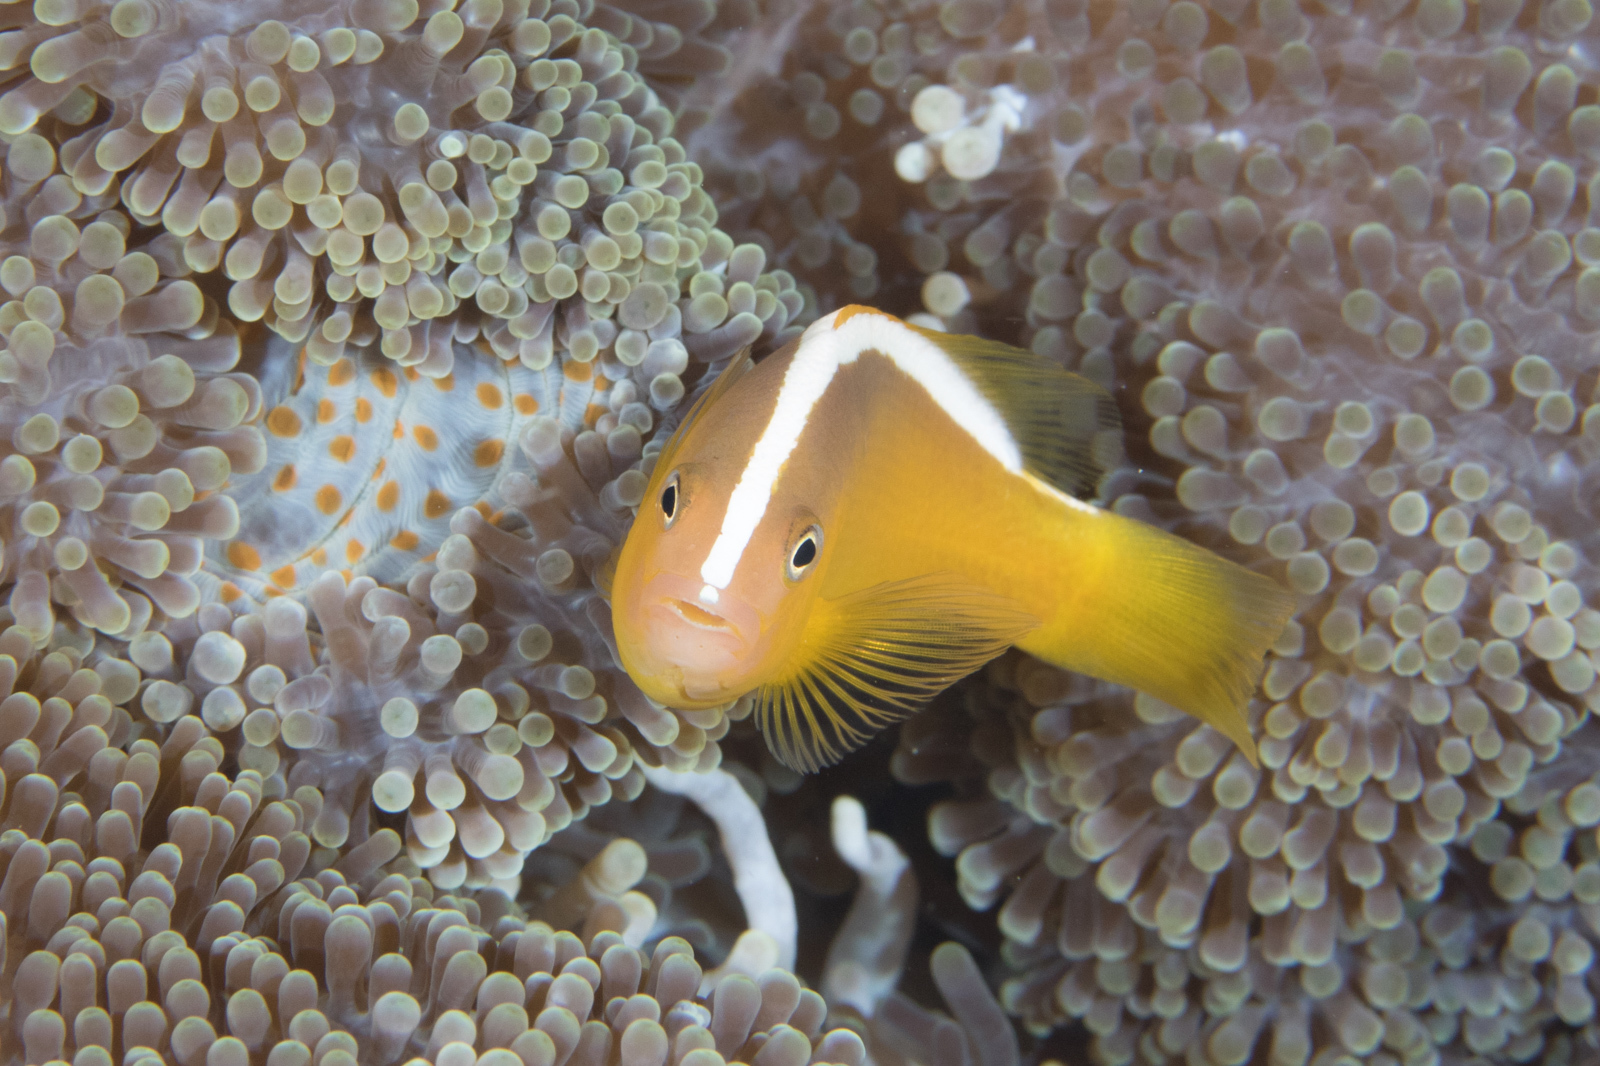 image of Amphiprion sandaracinos (Yellow clownfish)